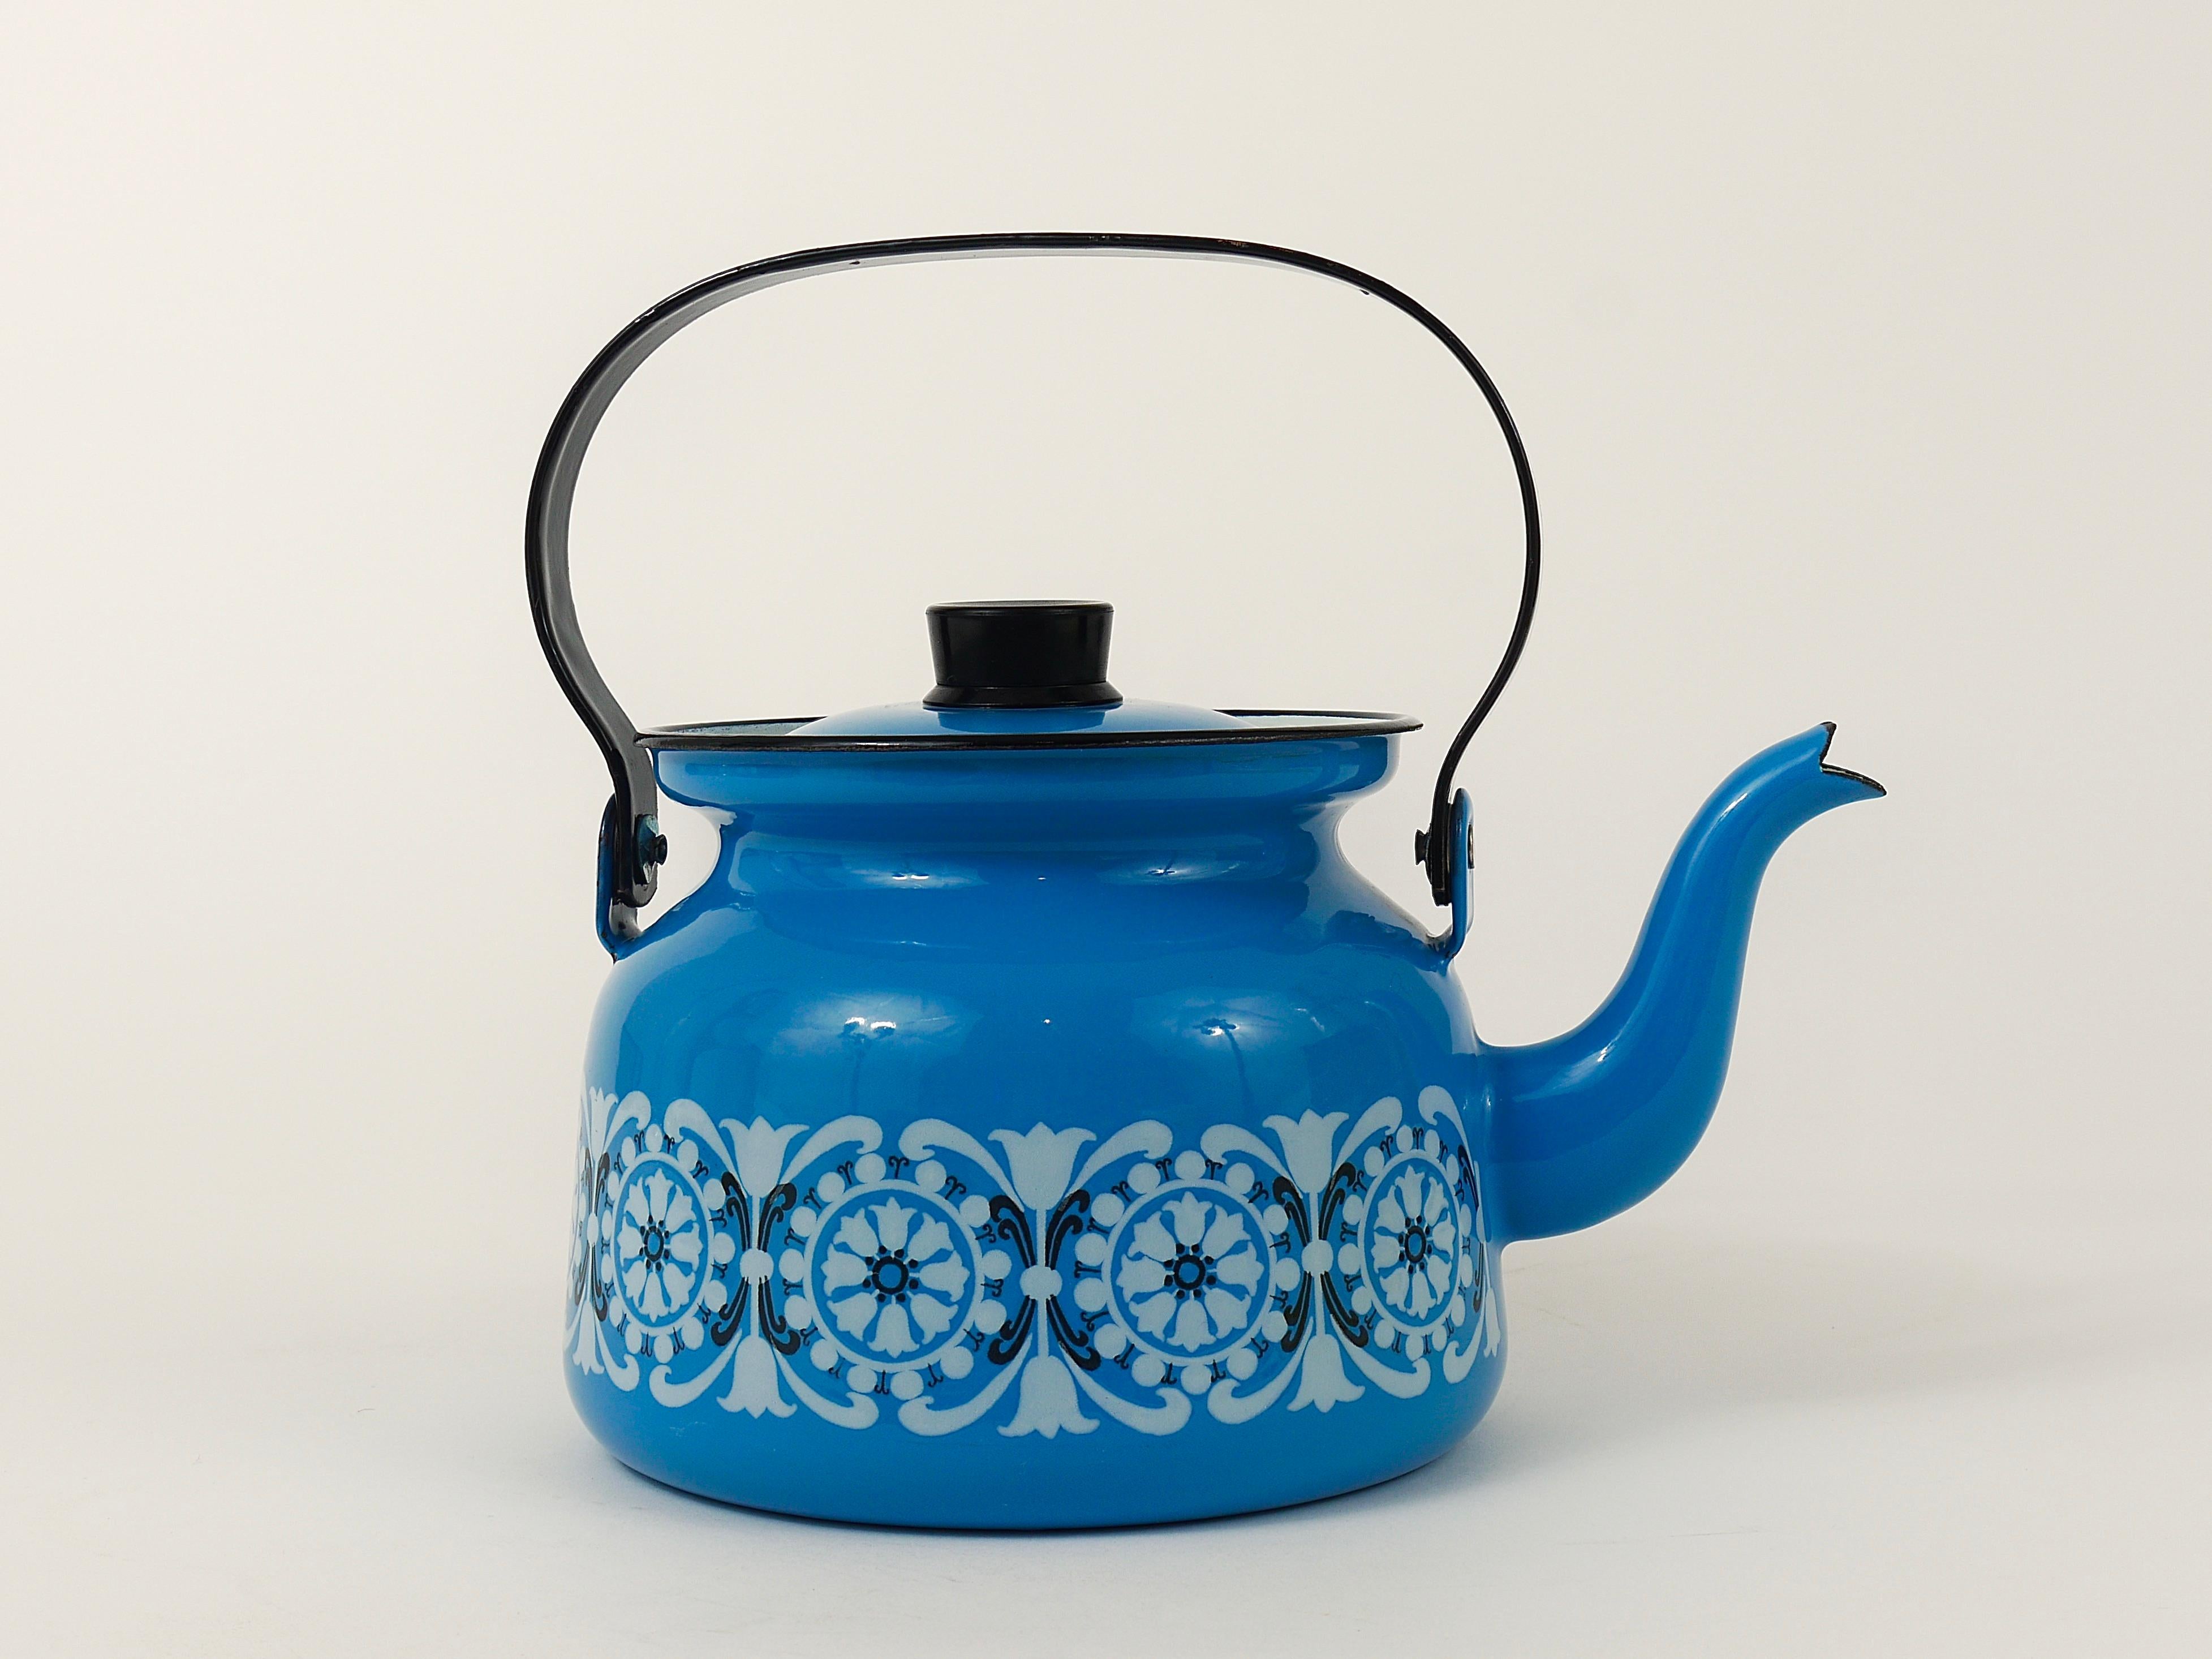 A lovely Scandinavian Mid-Century Modern enameled teapot / kettle from the 1960s. Designed by Kaj Franck and illustrated by Raija Uosikkinen, featuring white and black nordic Scandinavian floral tulip pattern over a sky blue base. Executed by Finel